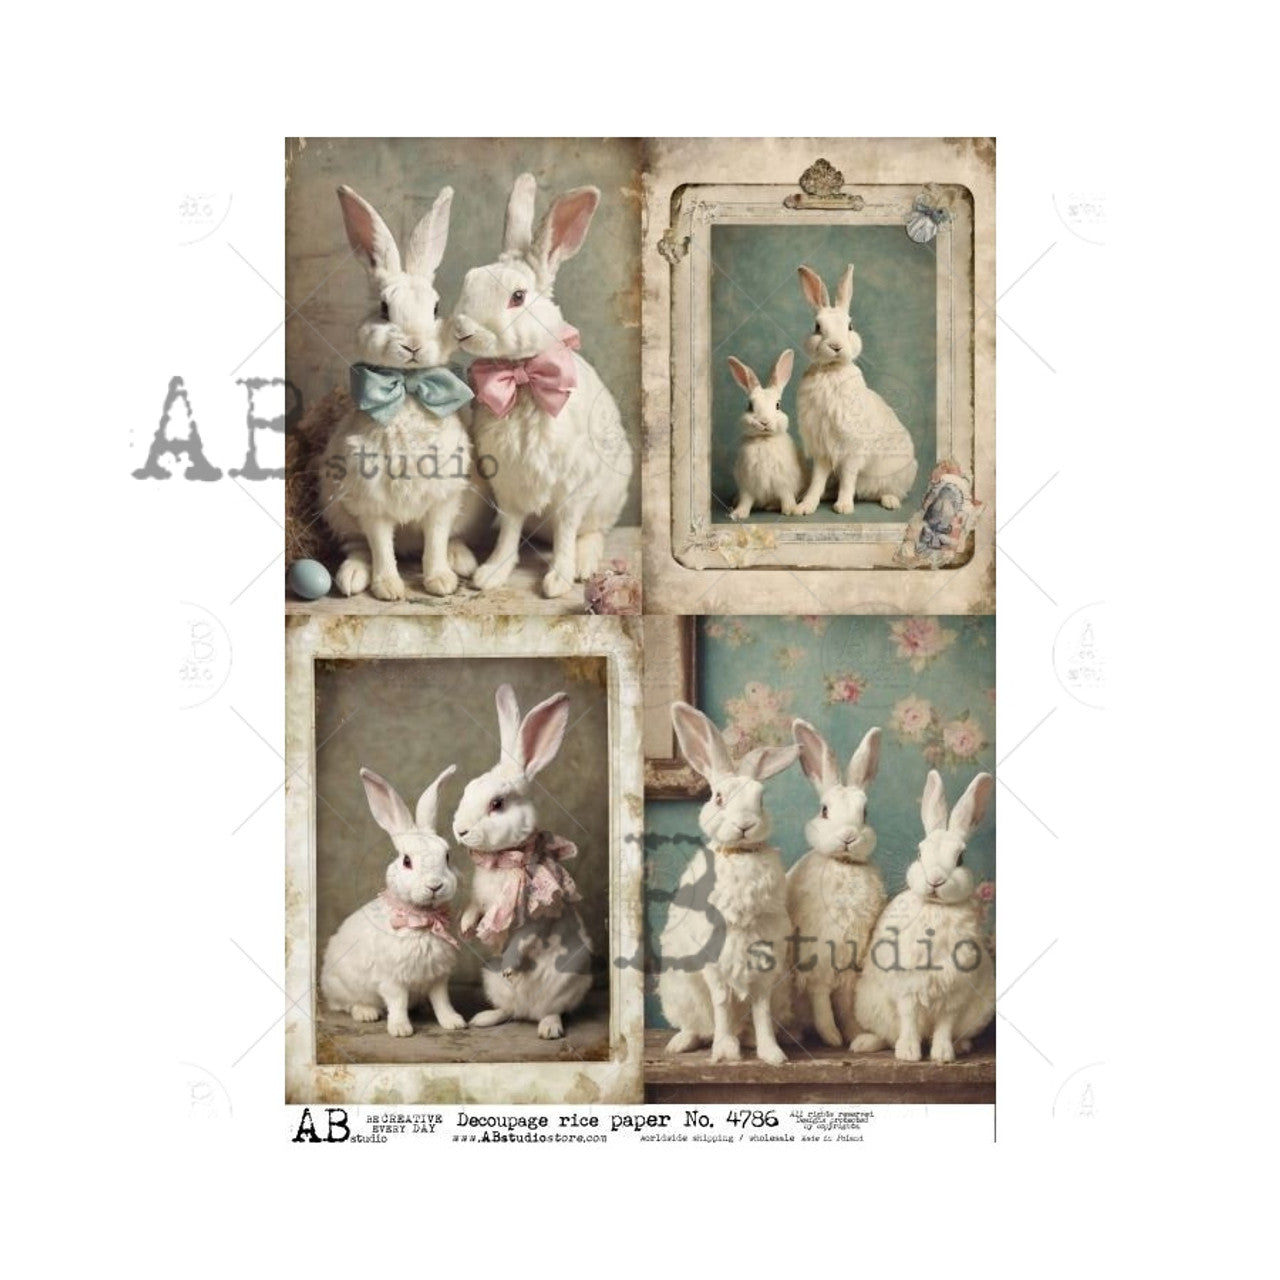 AB Studios A4 Rice Paper for Decoupage Bunny Familes Shabby Chic Style 4786